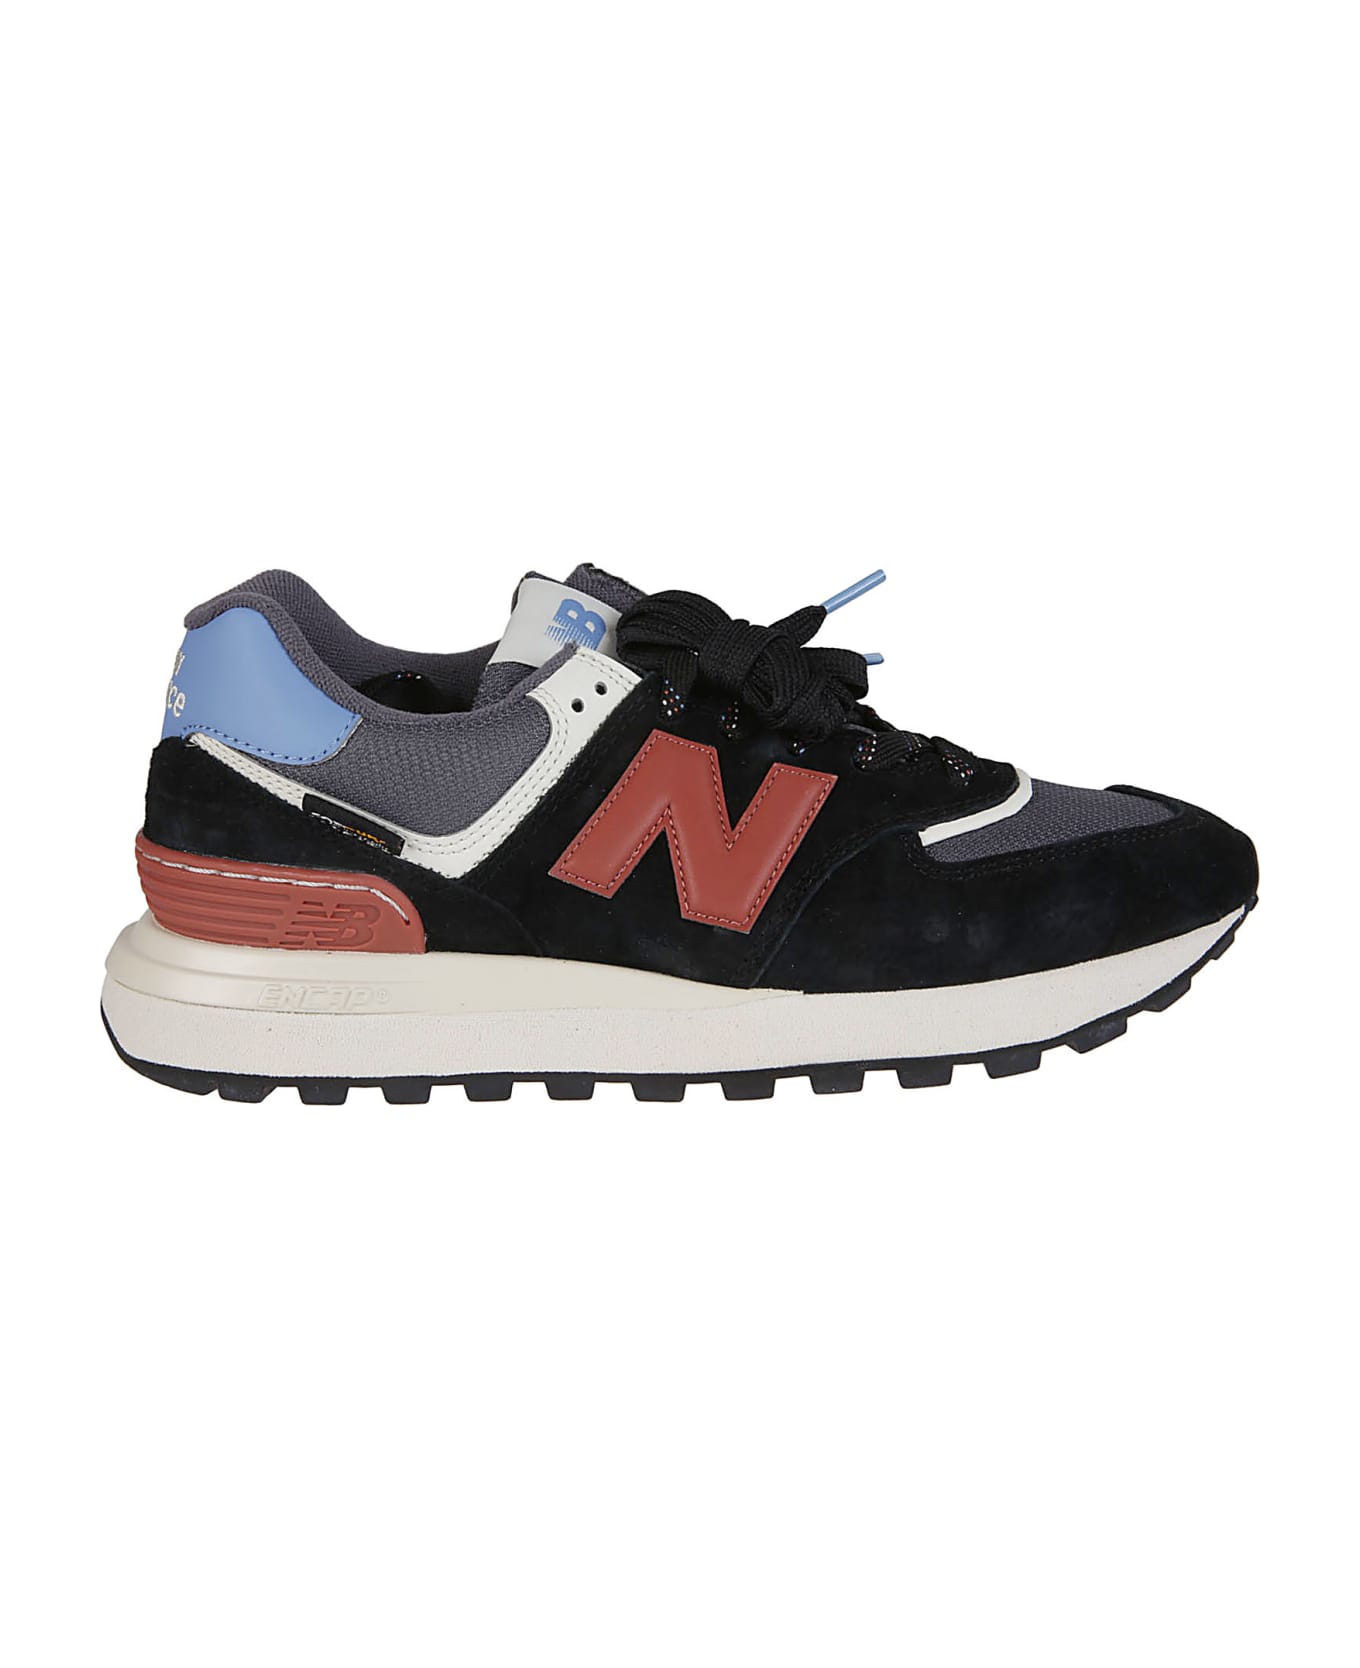 New Balance 574 Sneakers - MULTICOLOR スニーカー